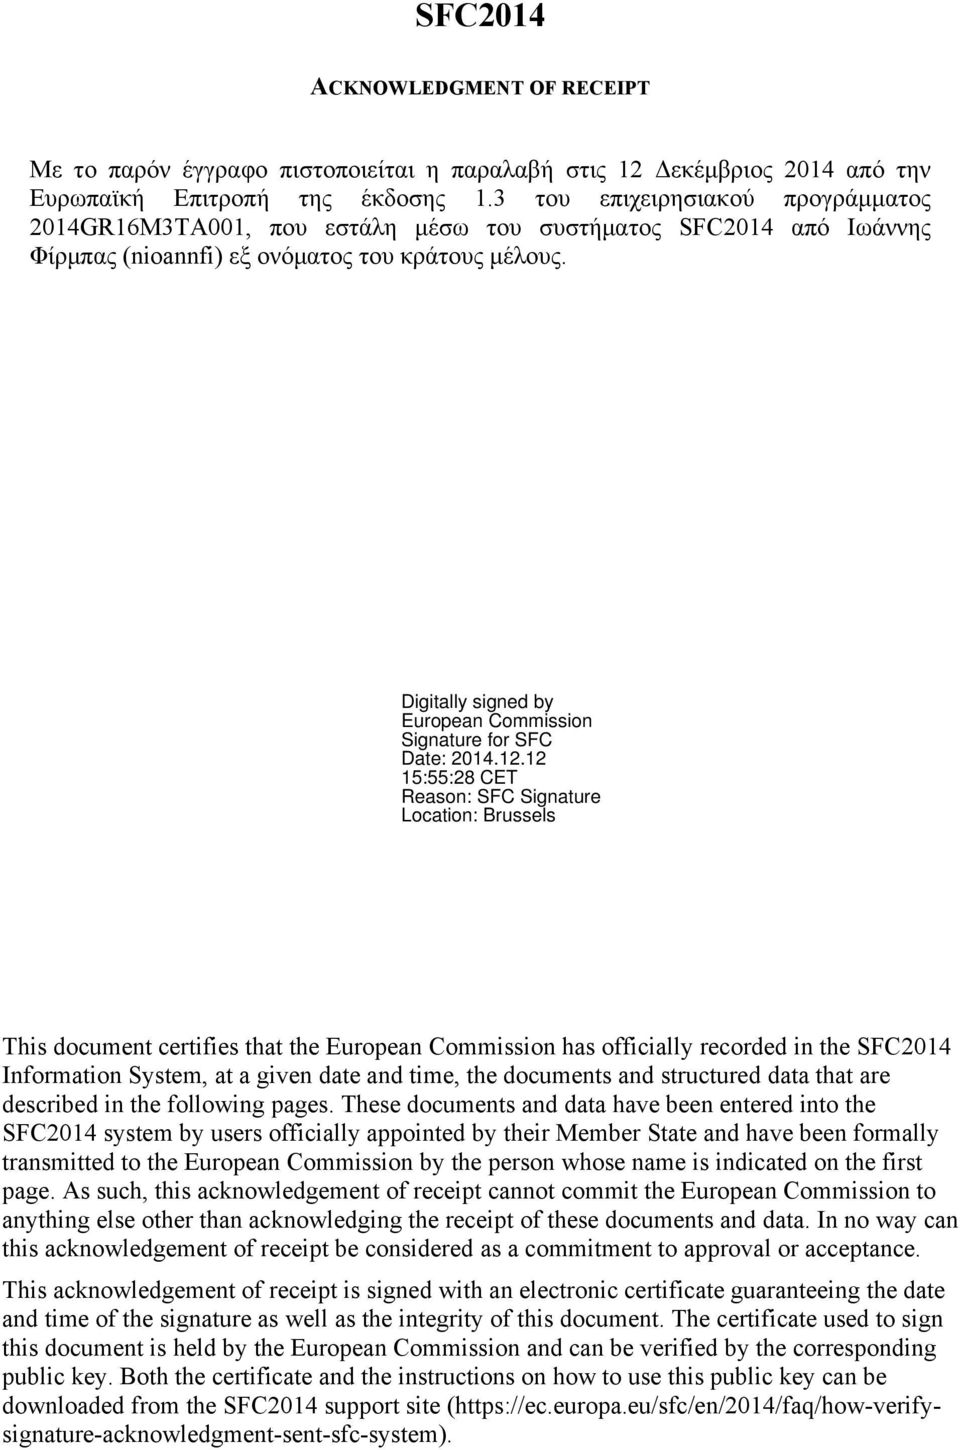 This document certifies that the European Commission has officially recorded in the SFC2014 Information System, at a given date and time, the documents and structured data that are described in the